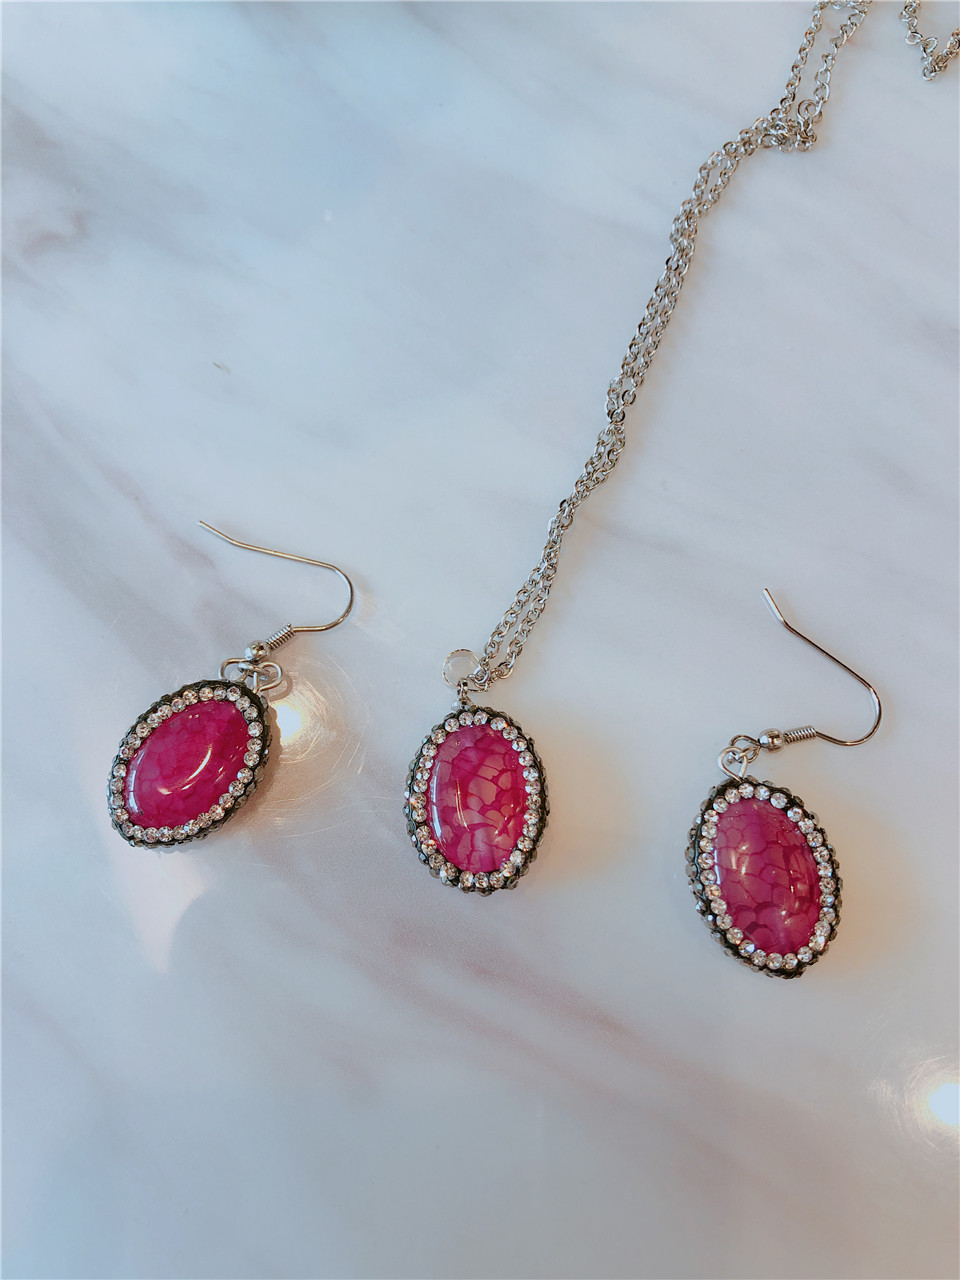 15:A set of red earrings (10x20mm, chain length 40cm)